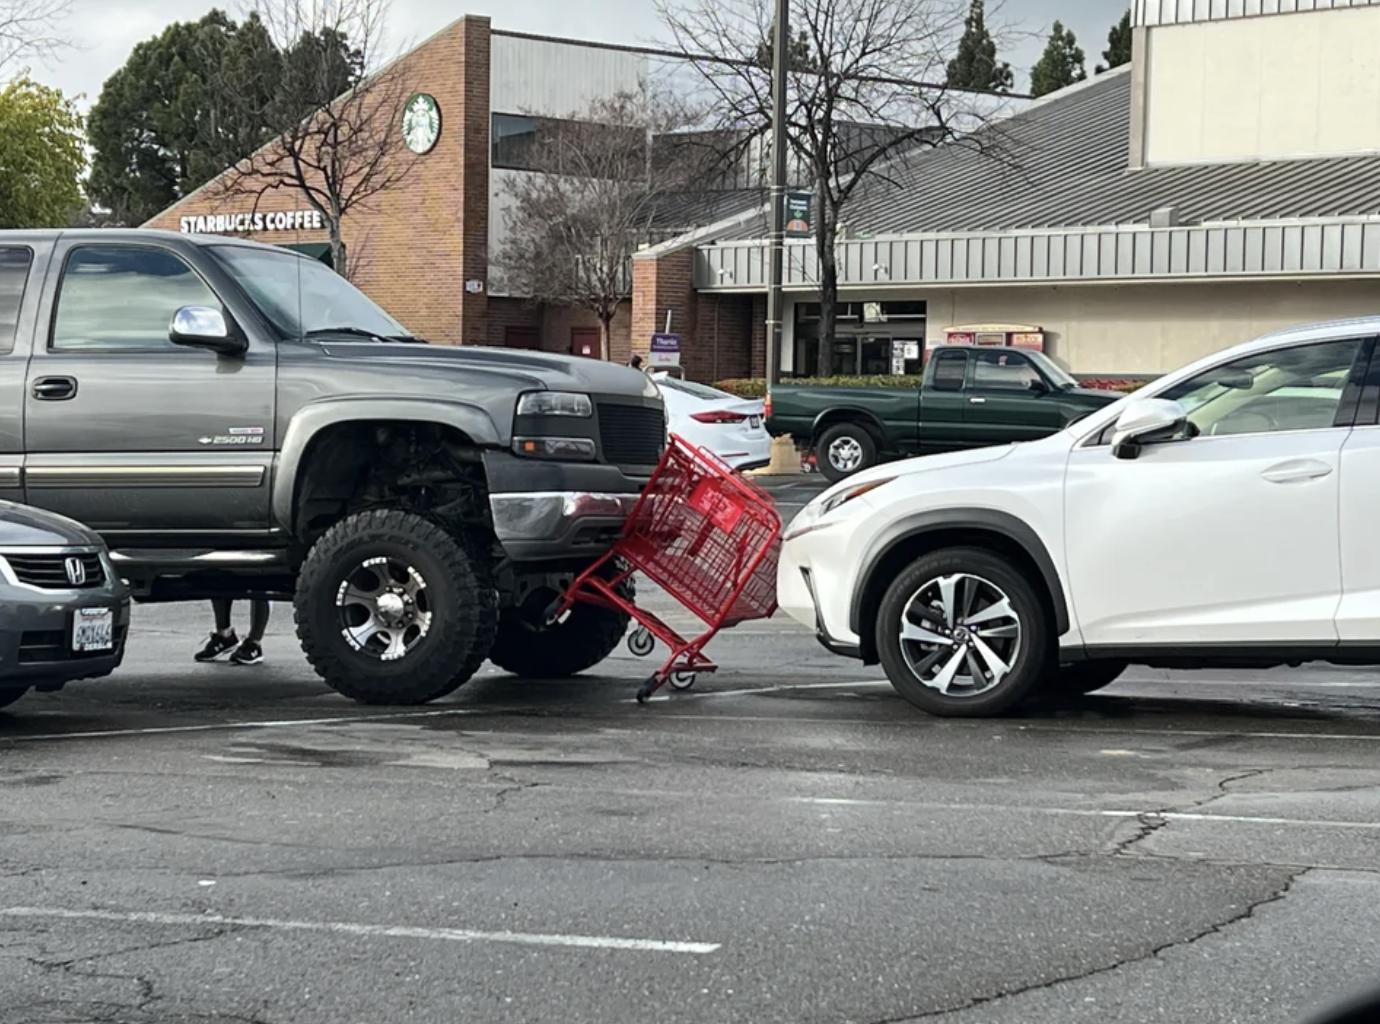 Lady in lifted truck couldn’t see the shopping cart.